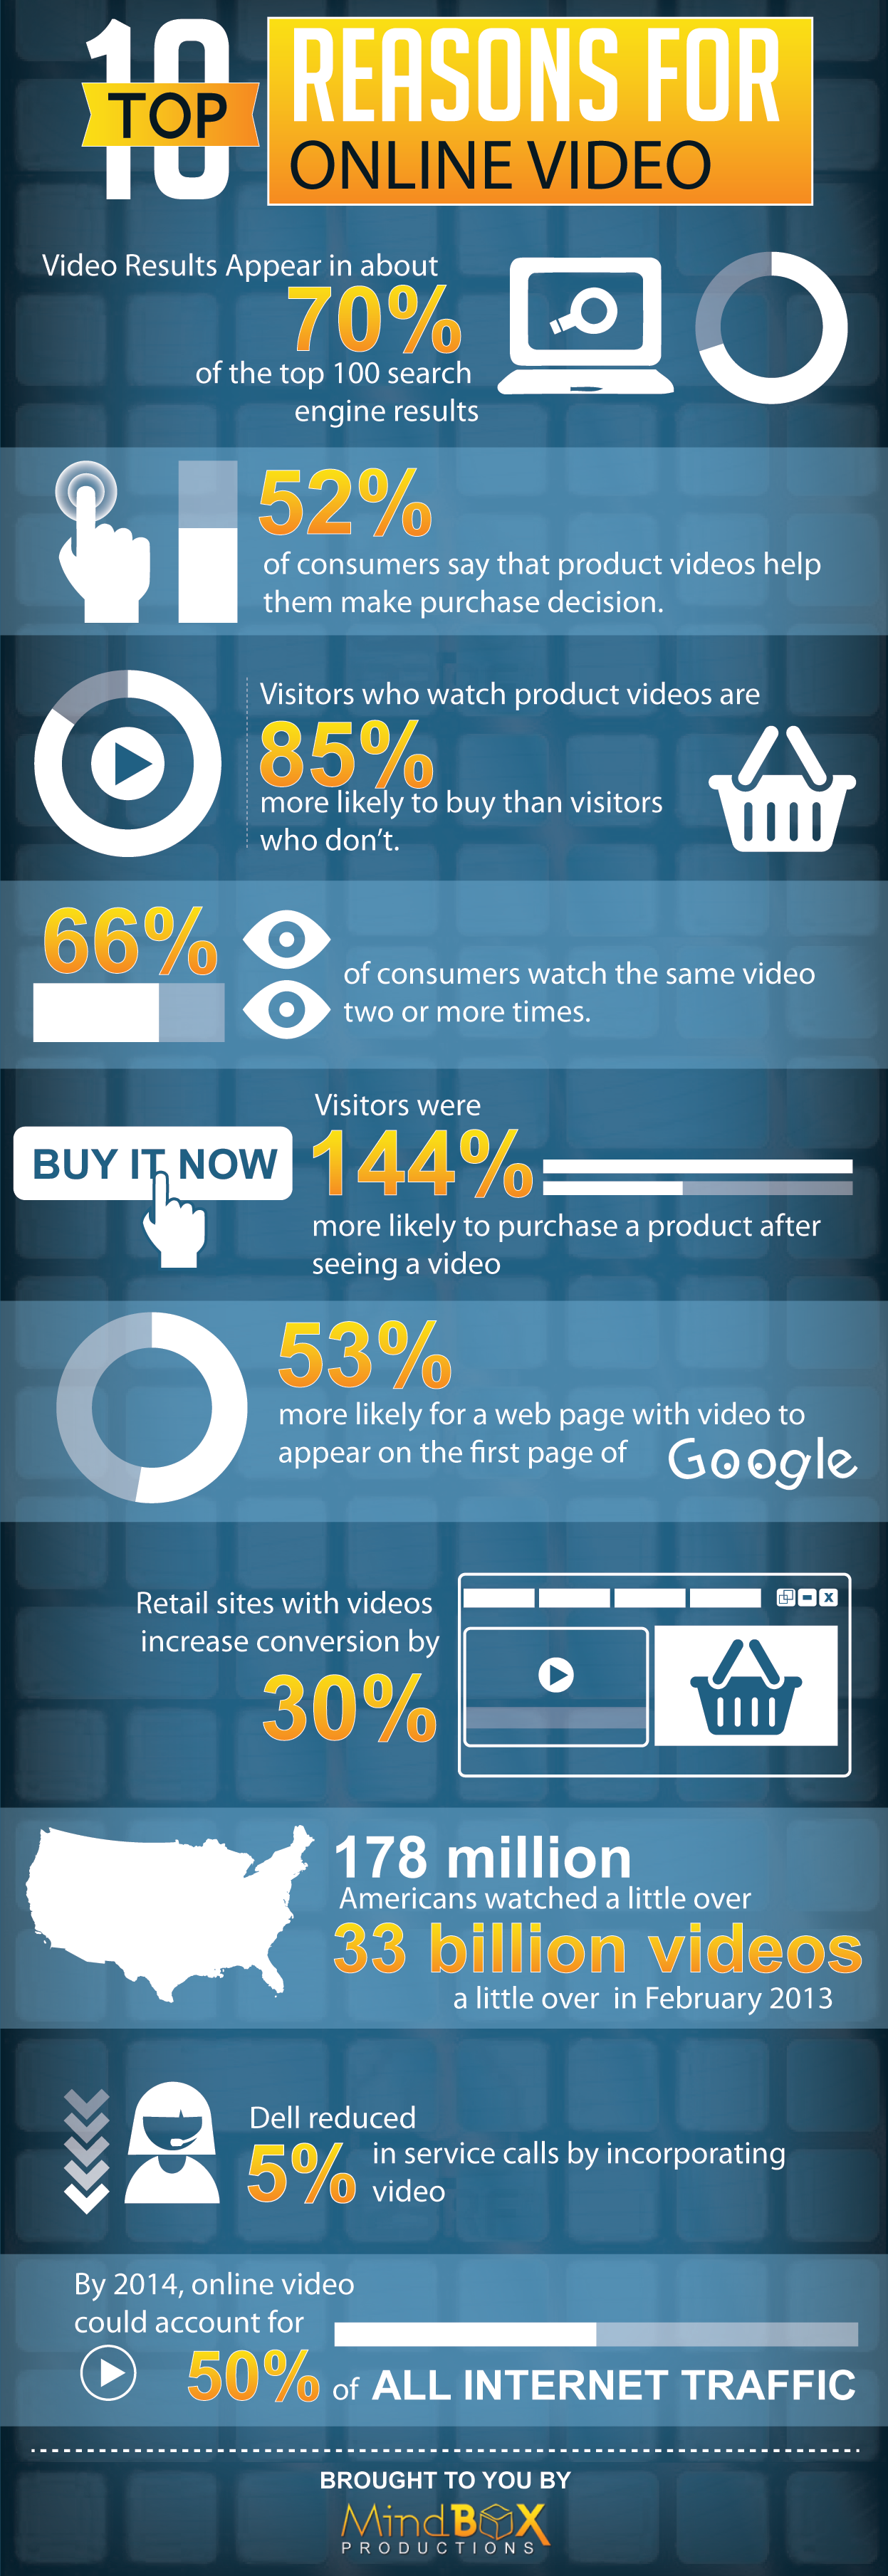 Top 10 Reasons for Online Video